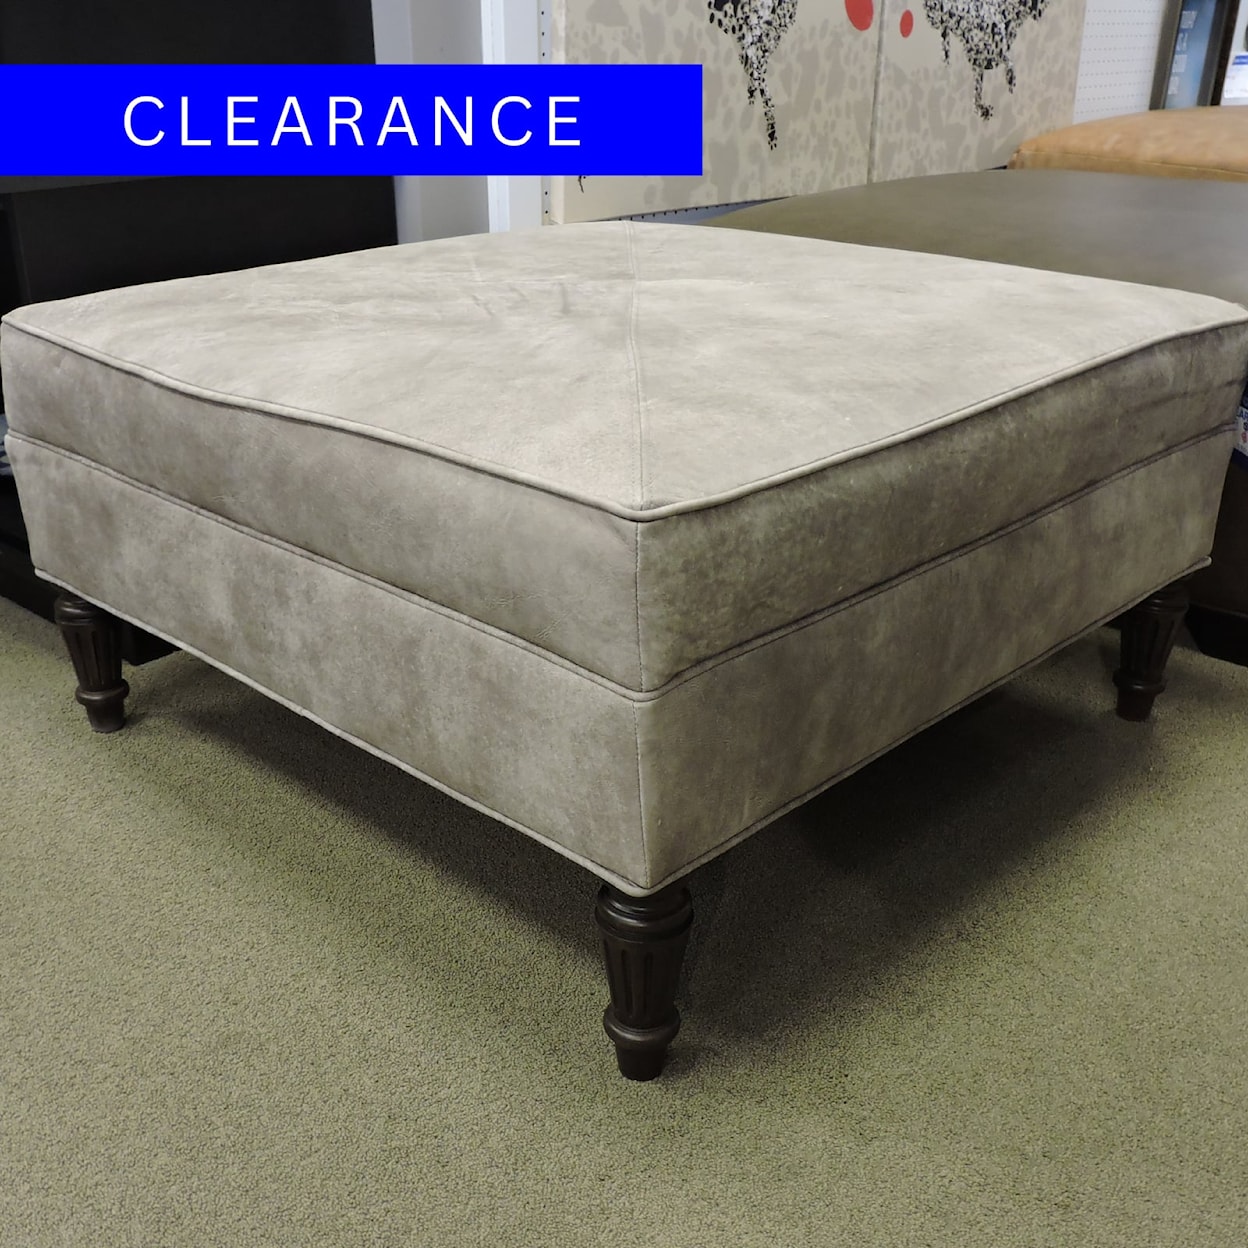 Miscellaneous Clearance Ottoman